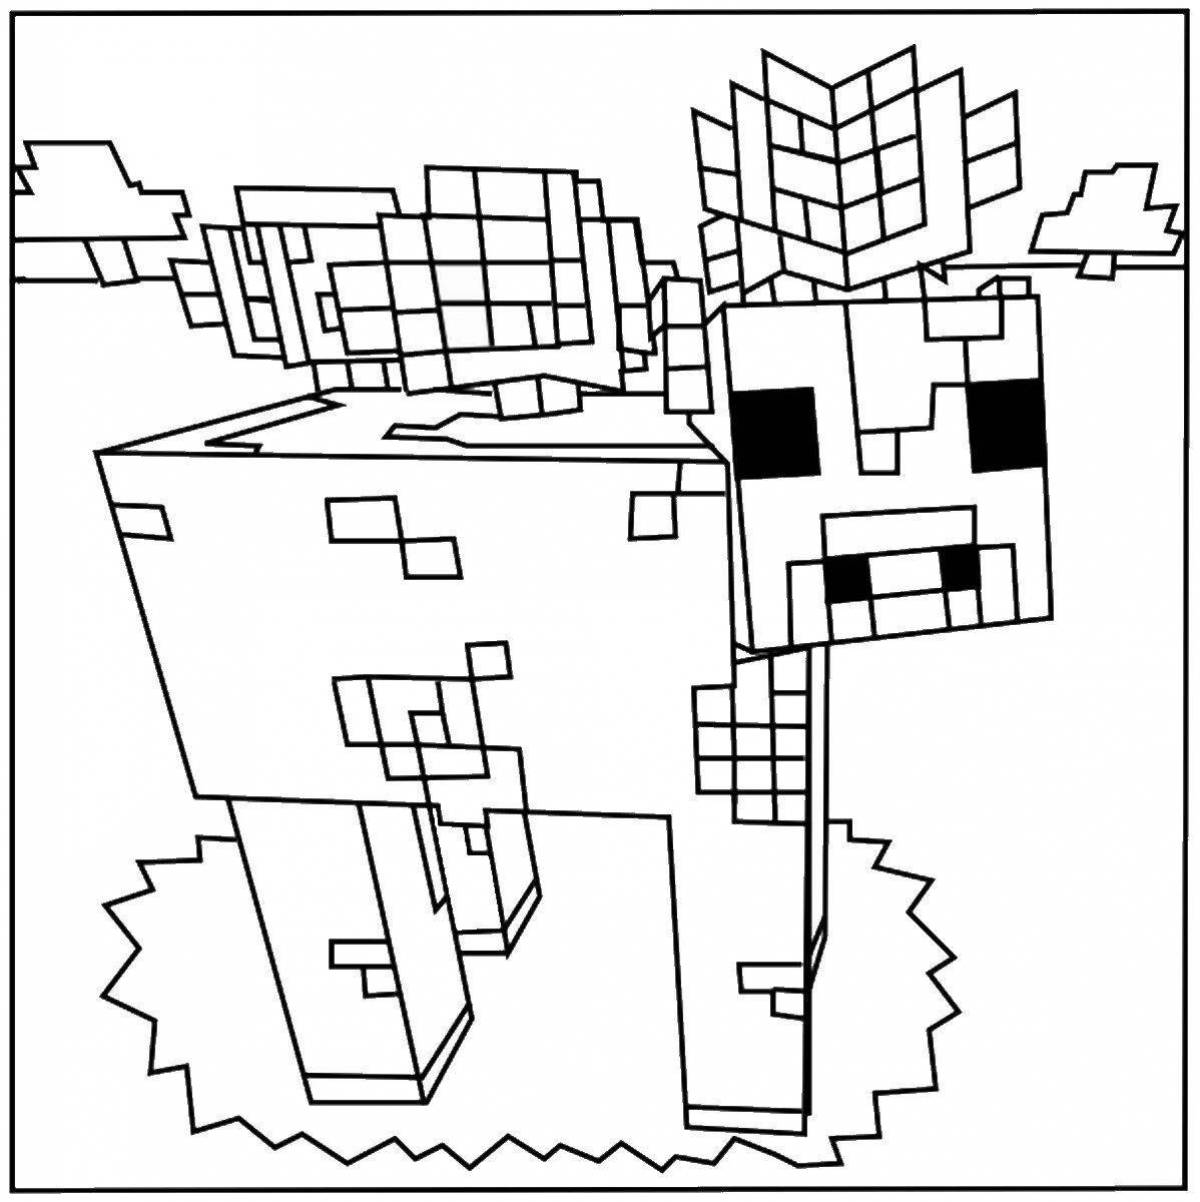 Gorgeous minecraft villager coloring page